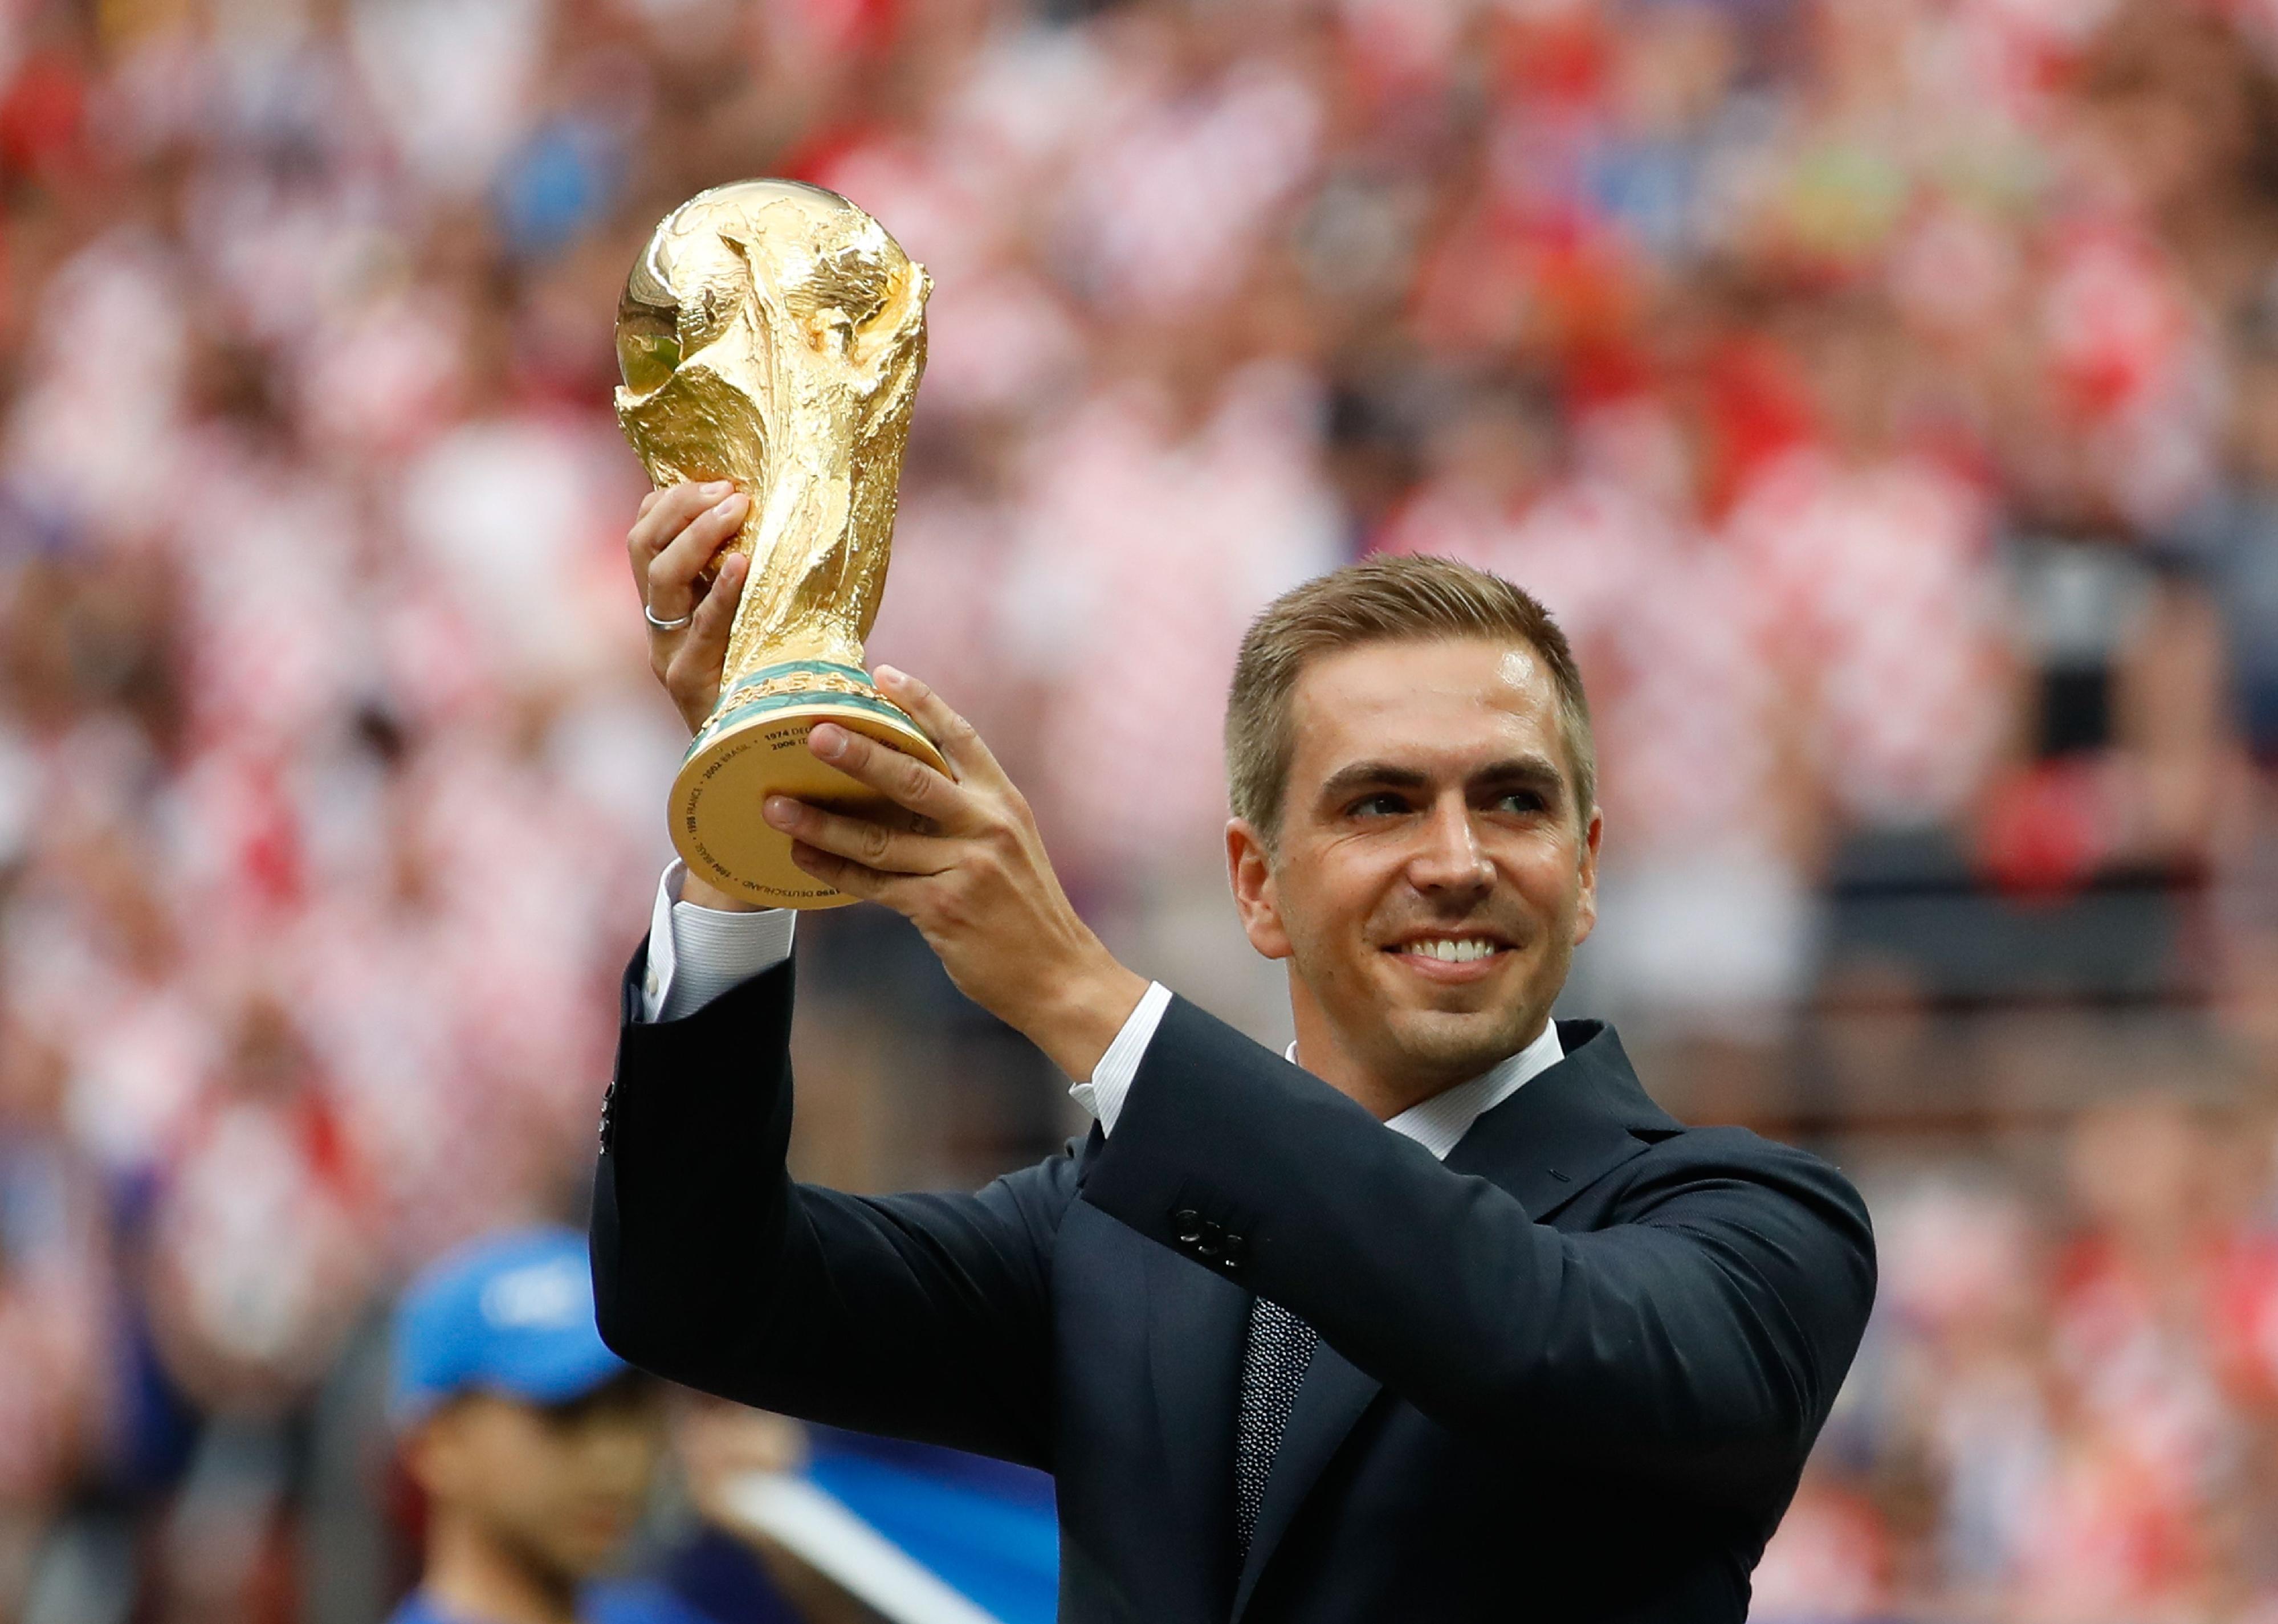 Philipp Lahm poses with the World Cup trophy